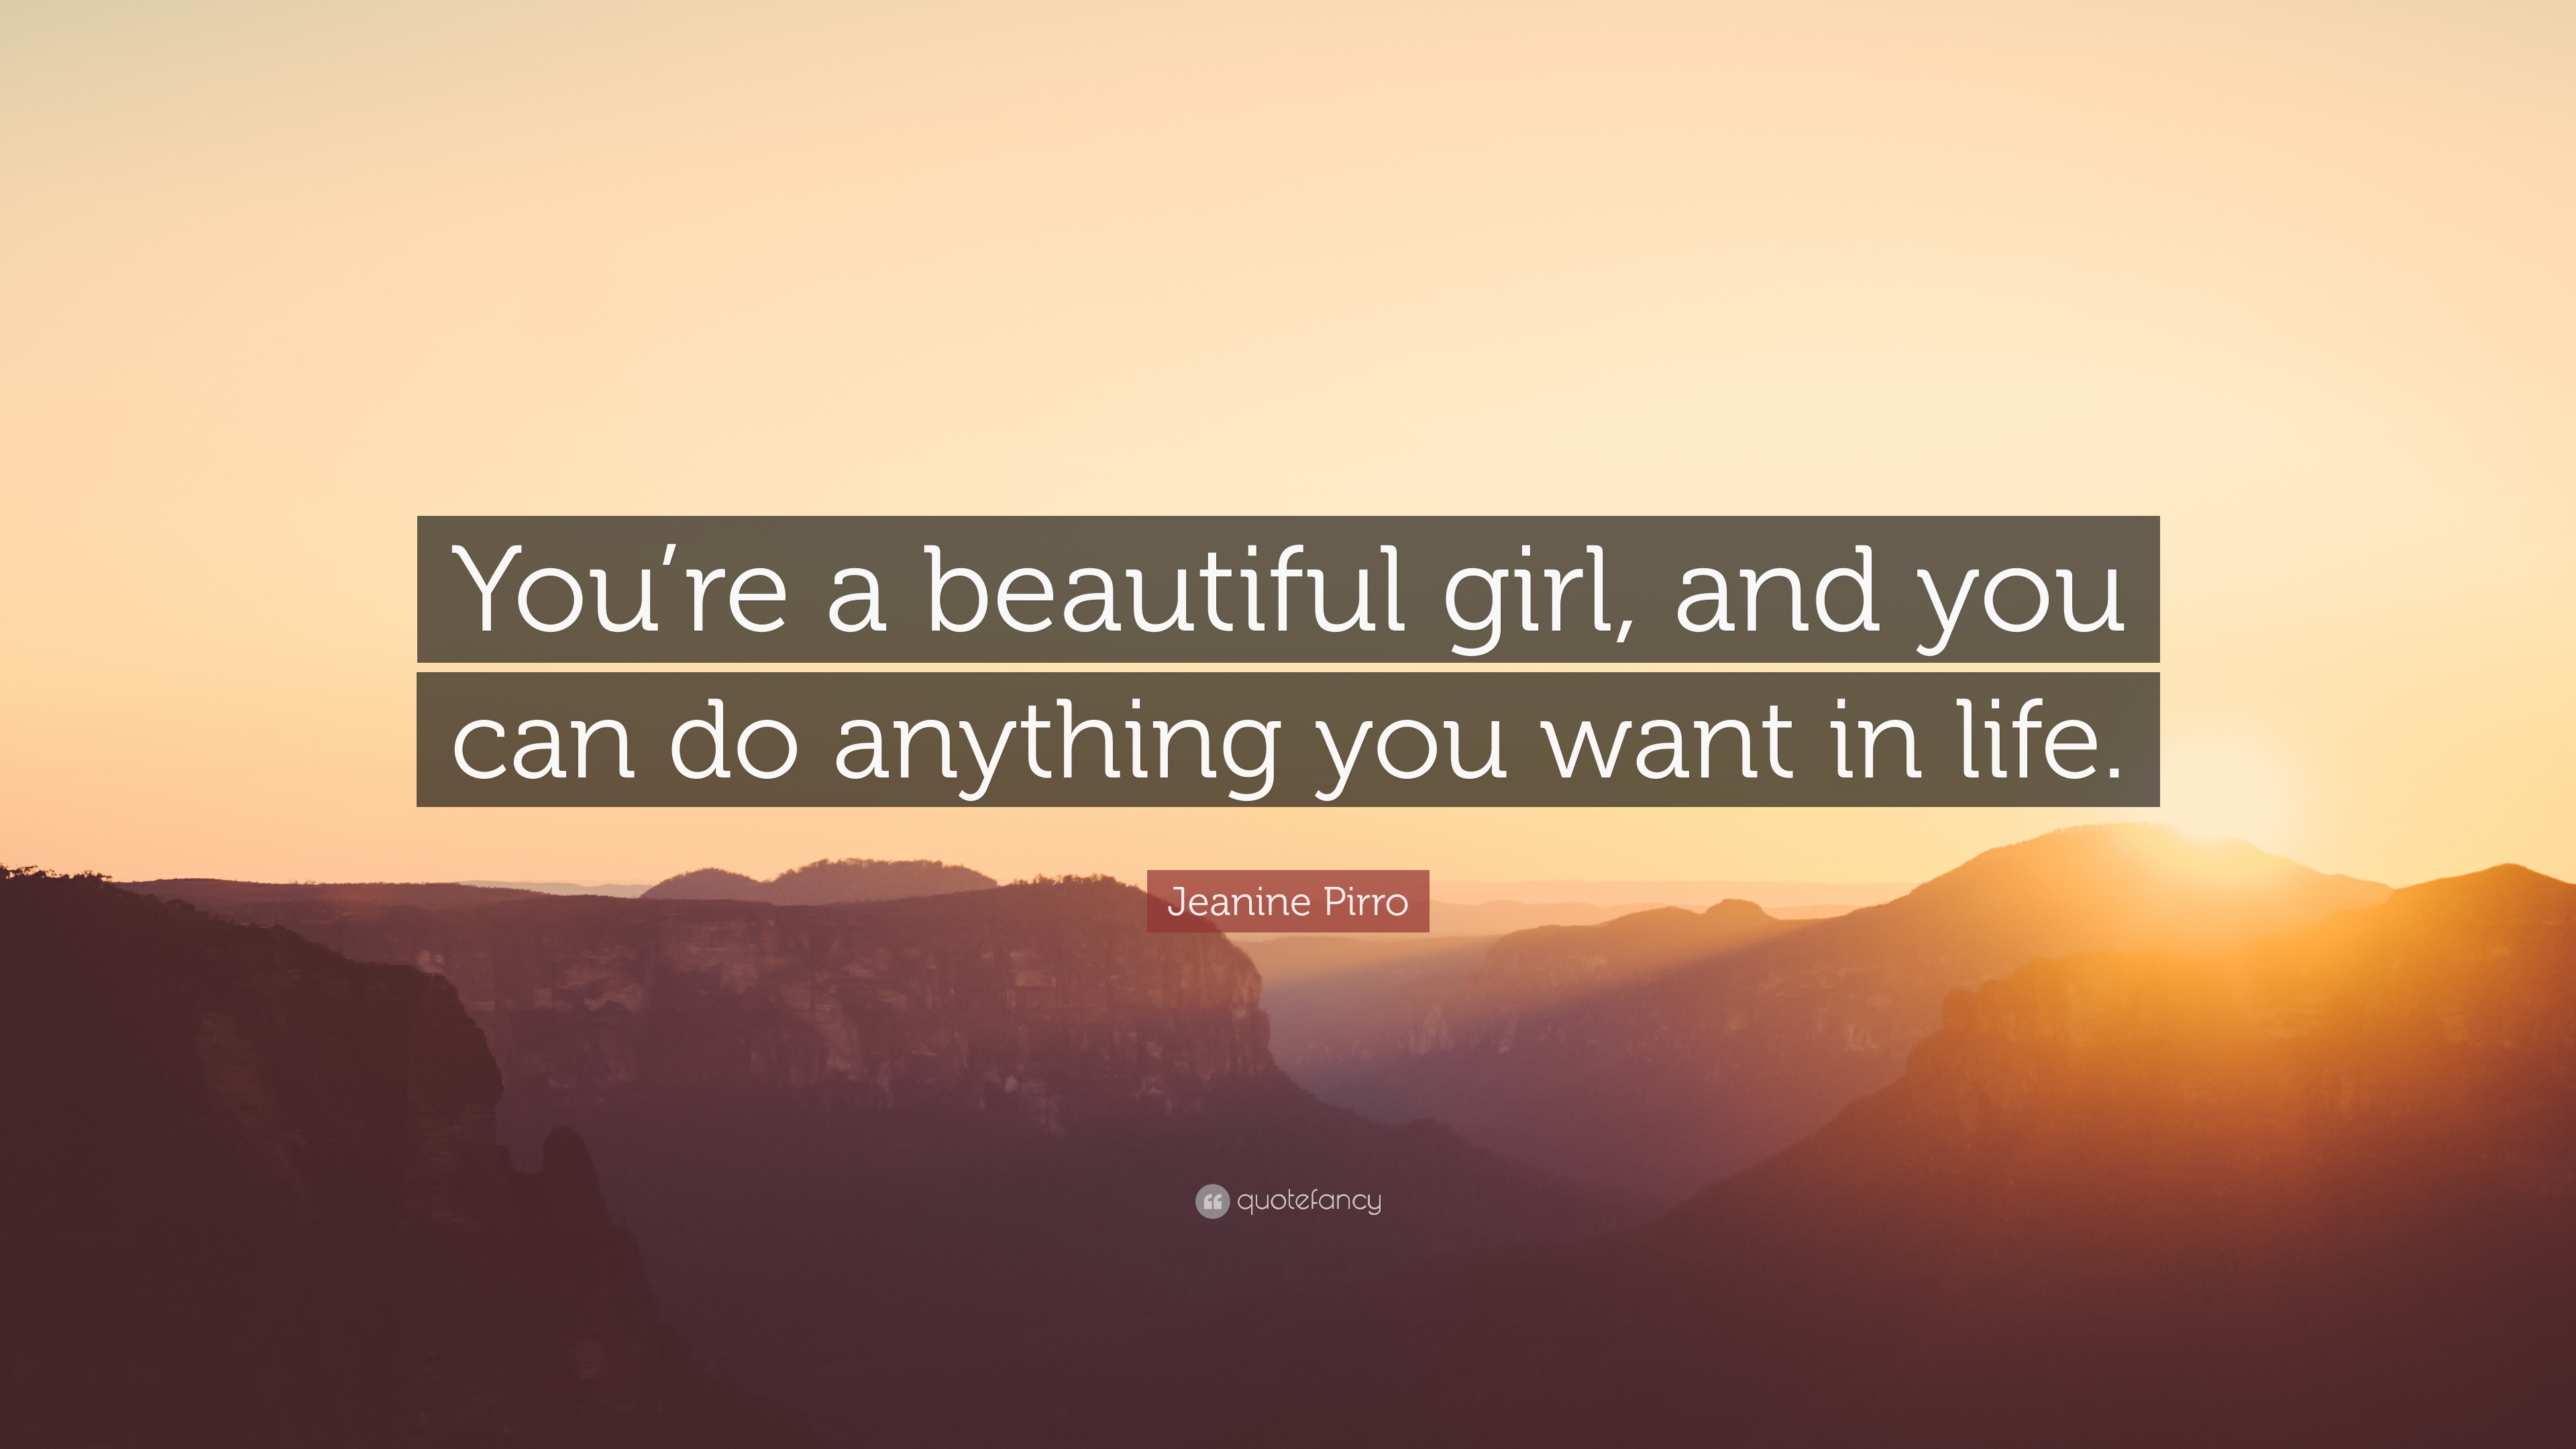 Jeanine Pirro Quote: “You’re a beautiful girl, and you can do anything ...